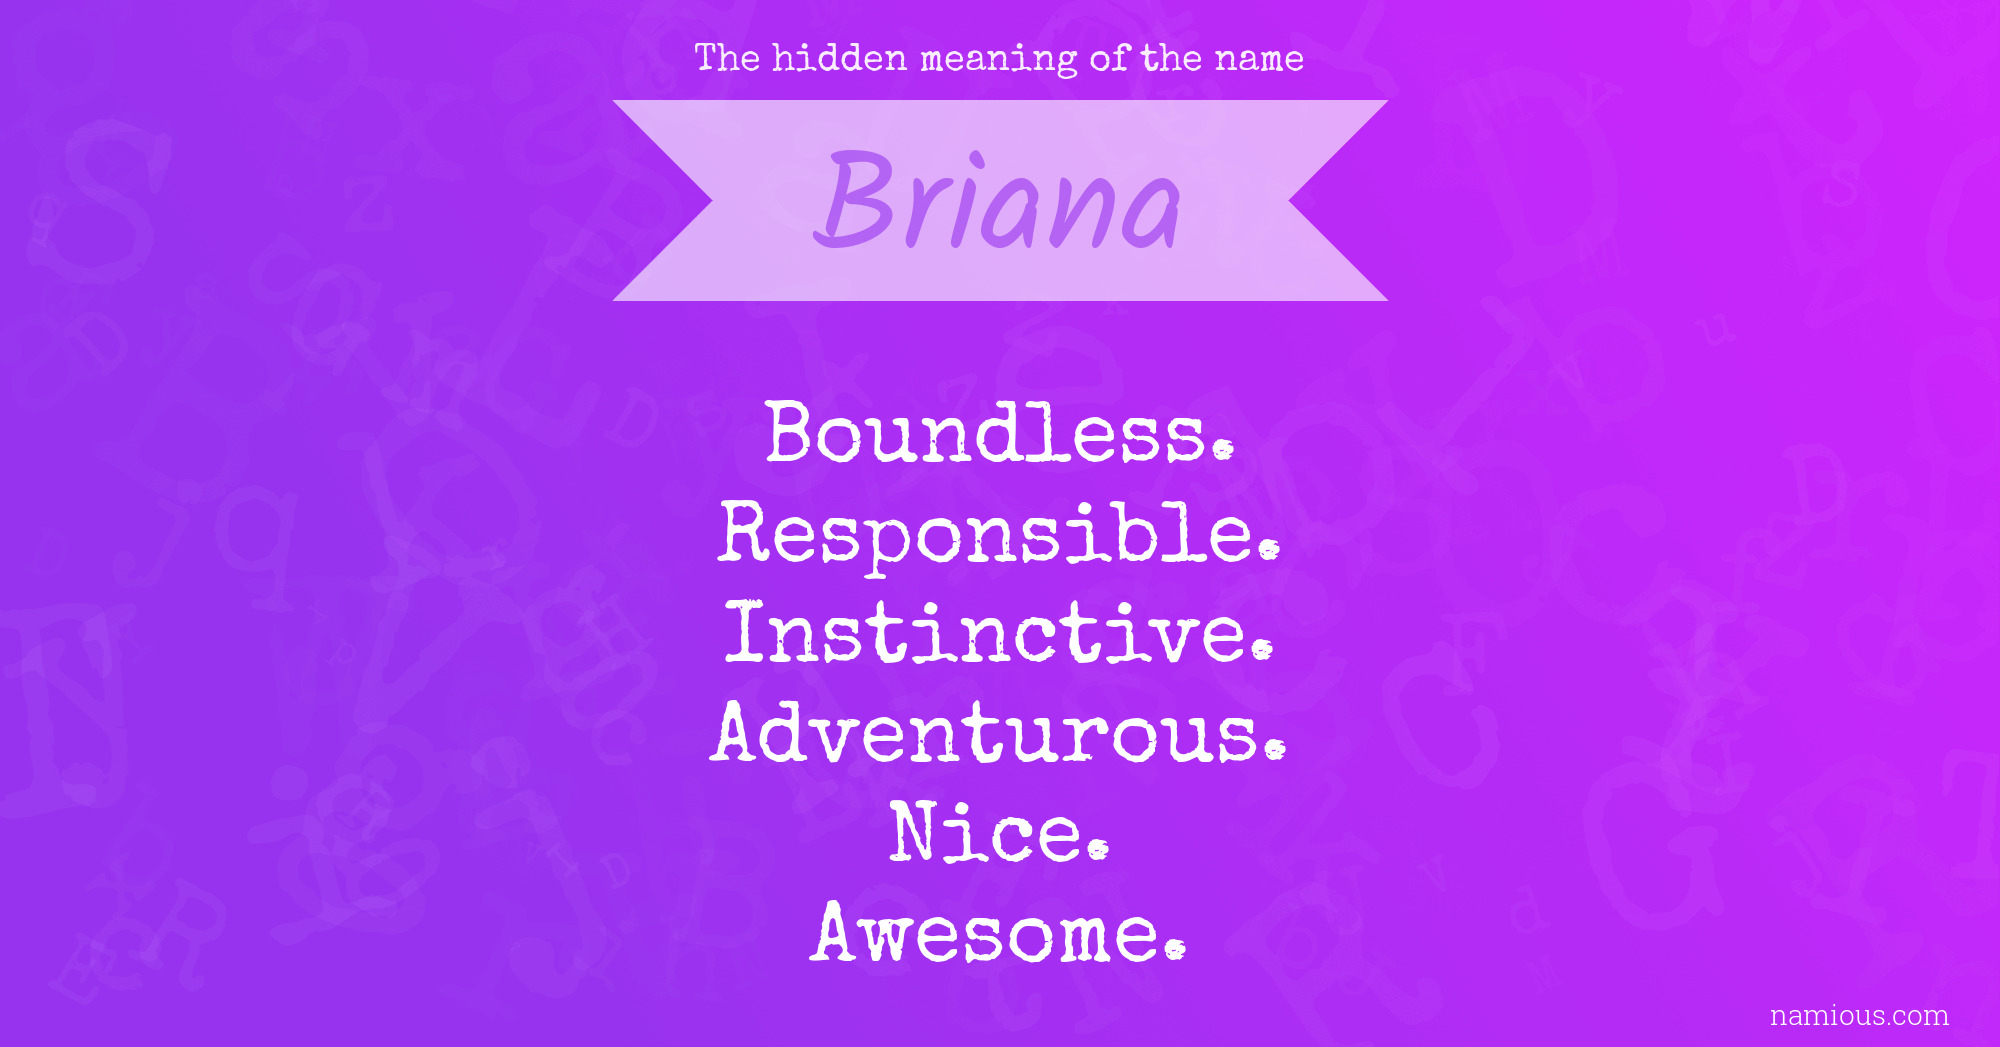 The hidden meaning of the name Briana